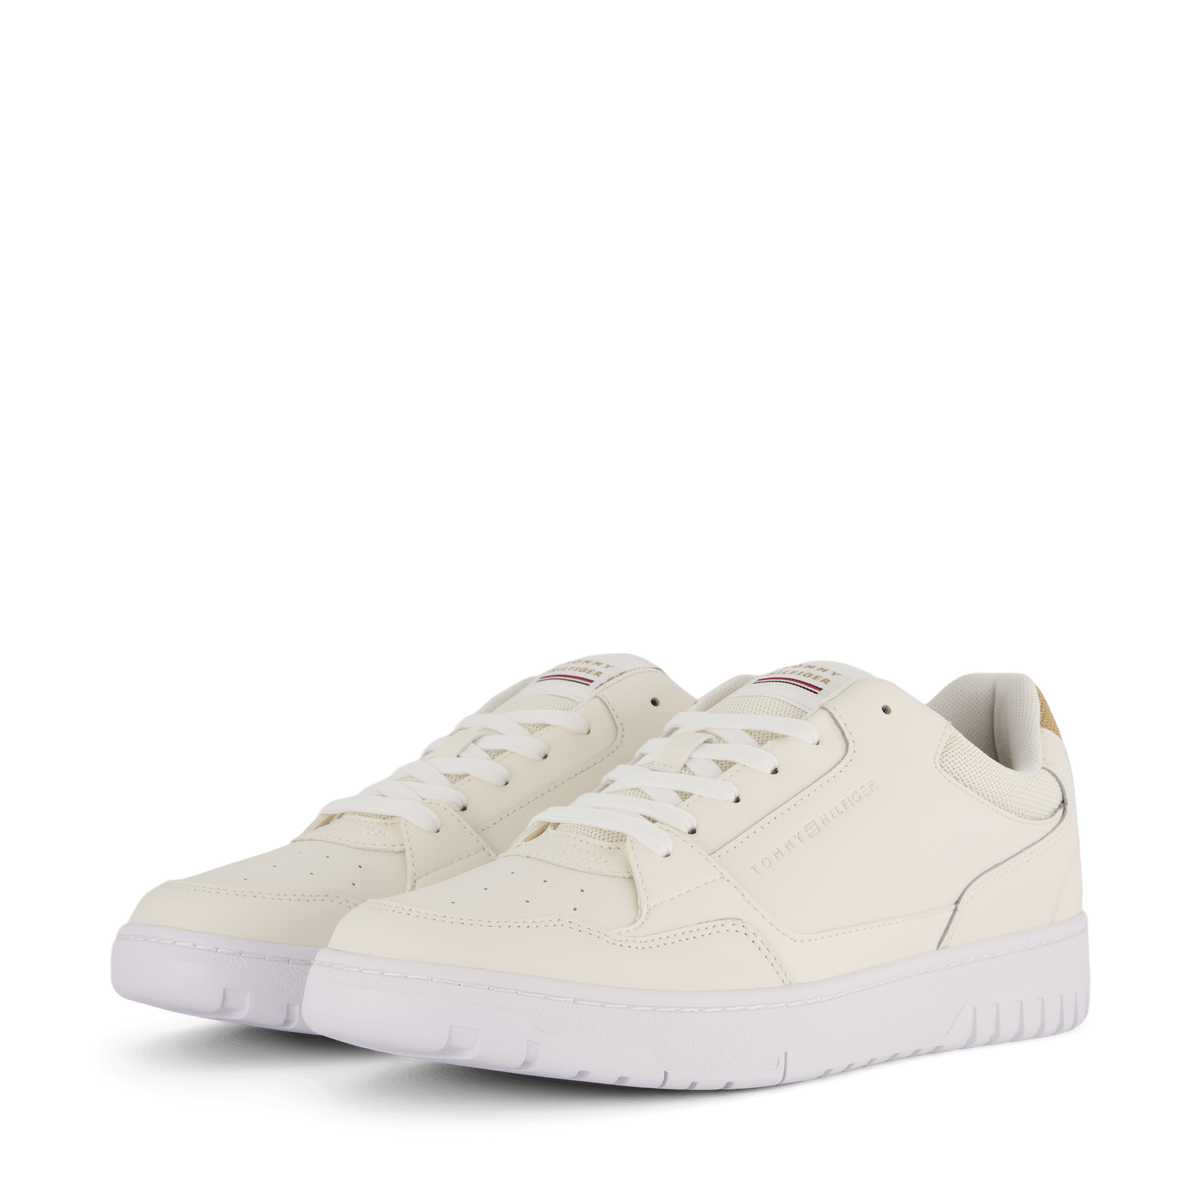 Th Basket Core Leather Whisper White